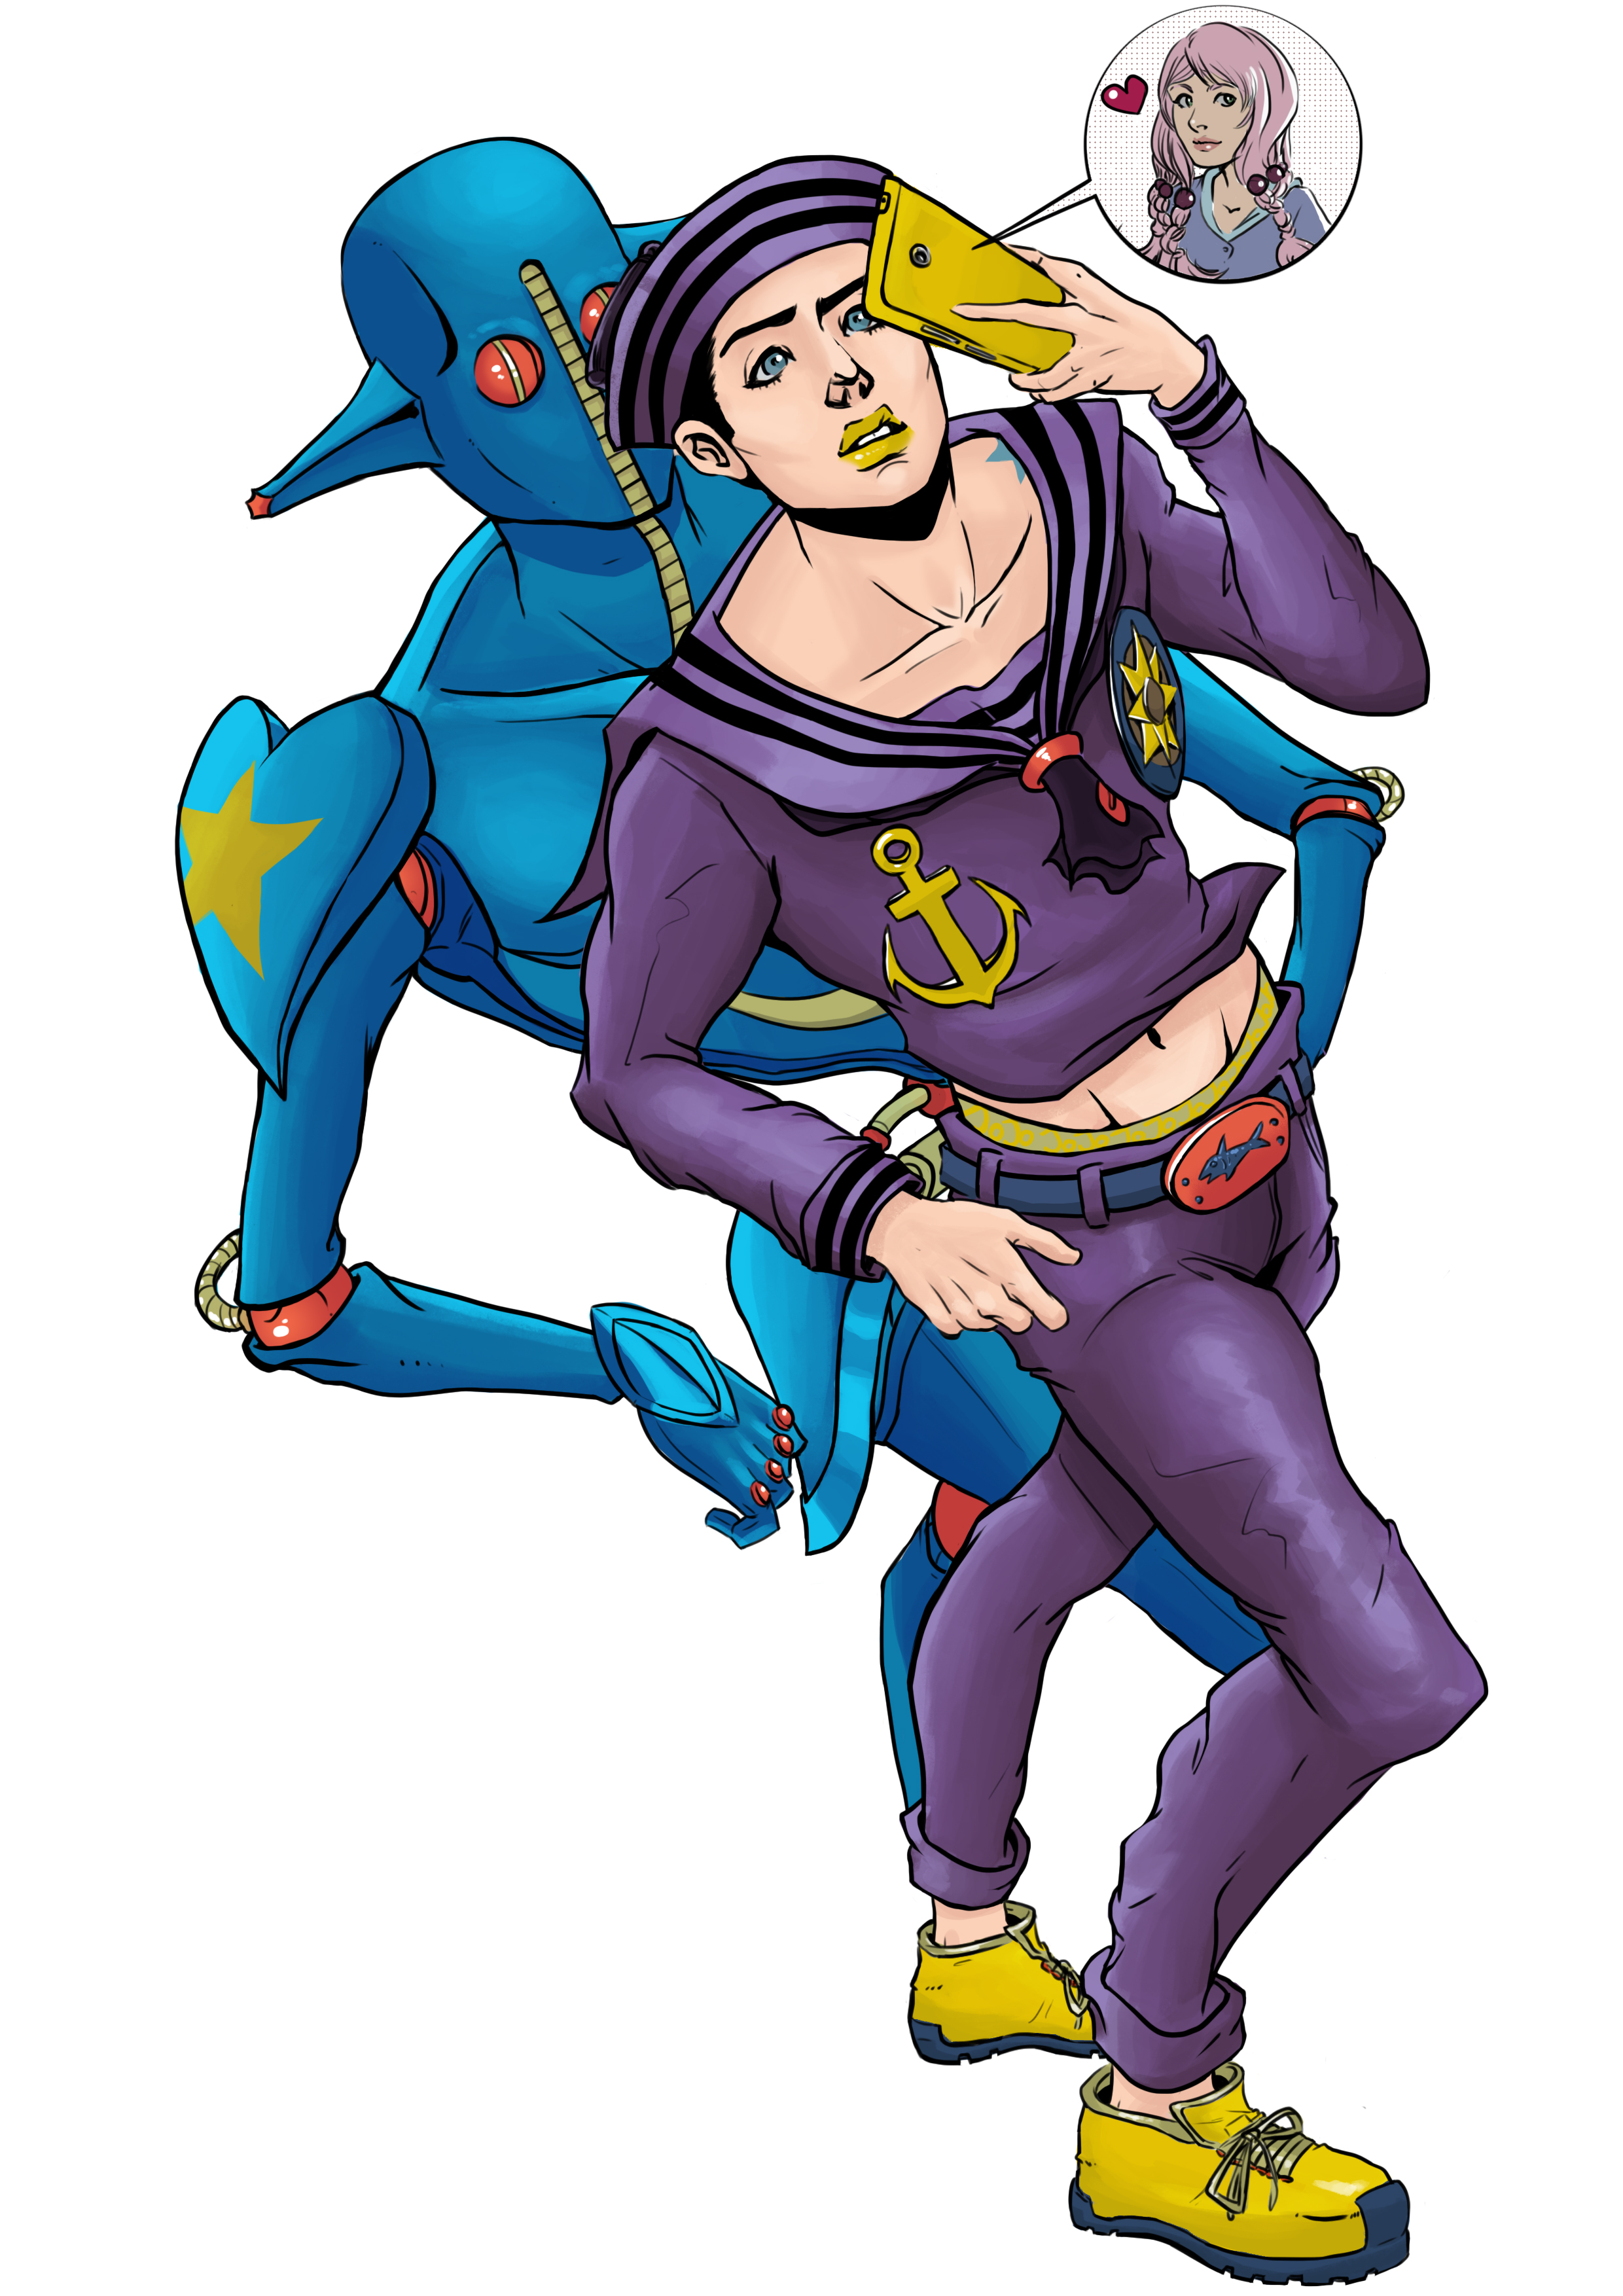 Jojolion josuke And his stand Soft And Wet by RWhitney75 on DeviantArt